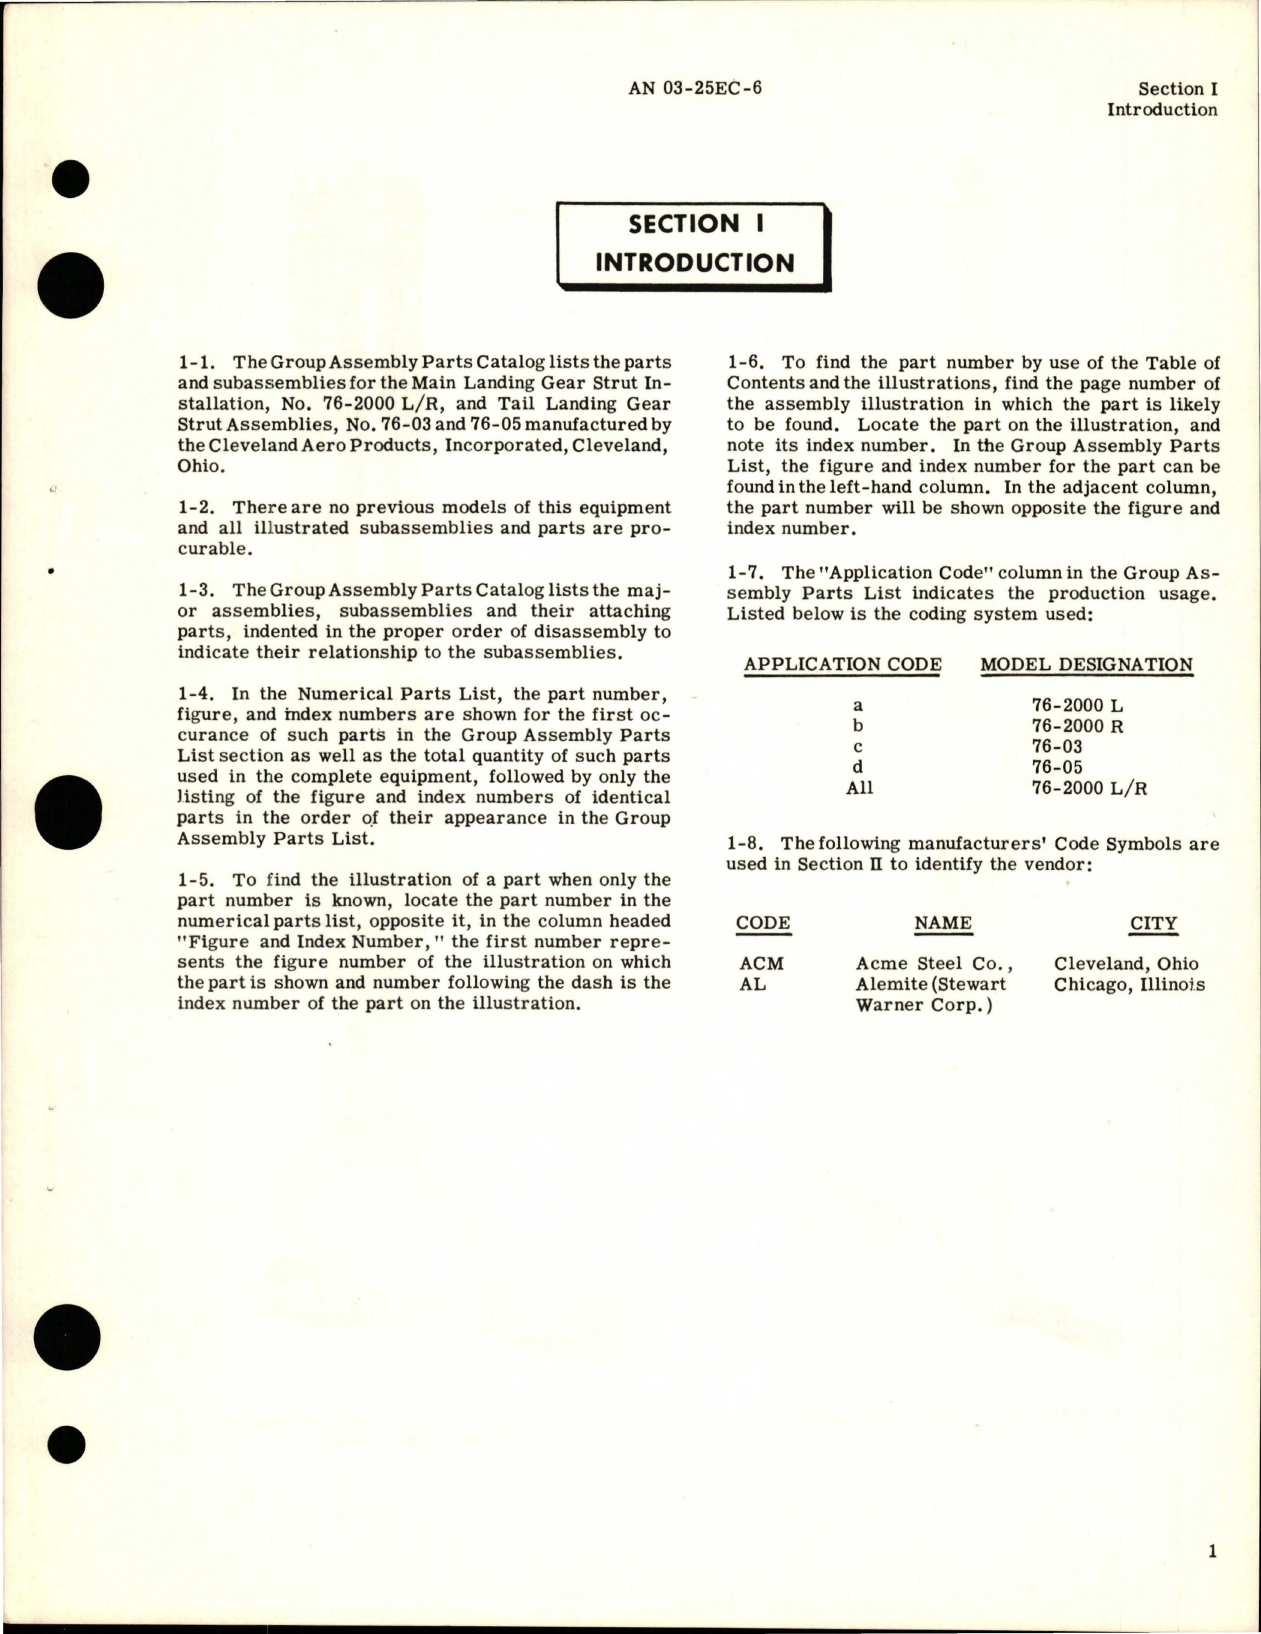 Sample page 5 from AirCorps Library document: Parts Catalog for Main Landing Gear Installation and Tail Landing Gear Strut Assembly